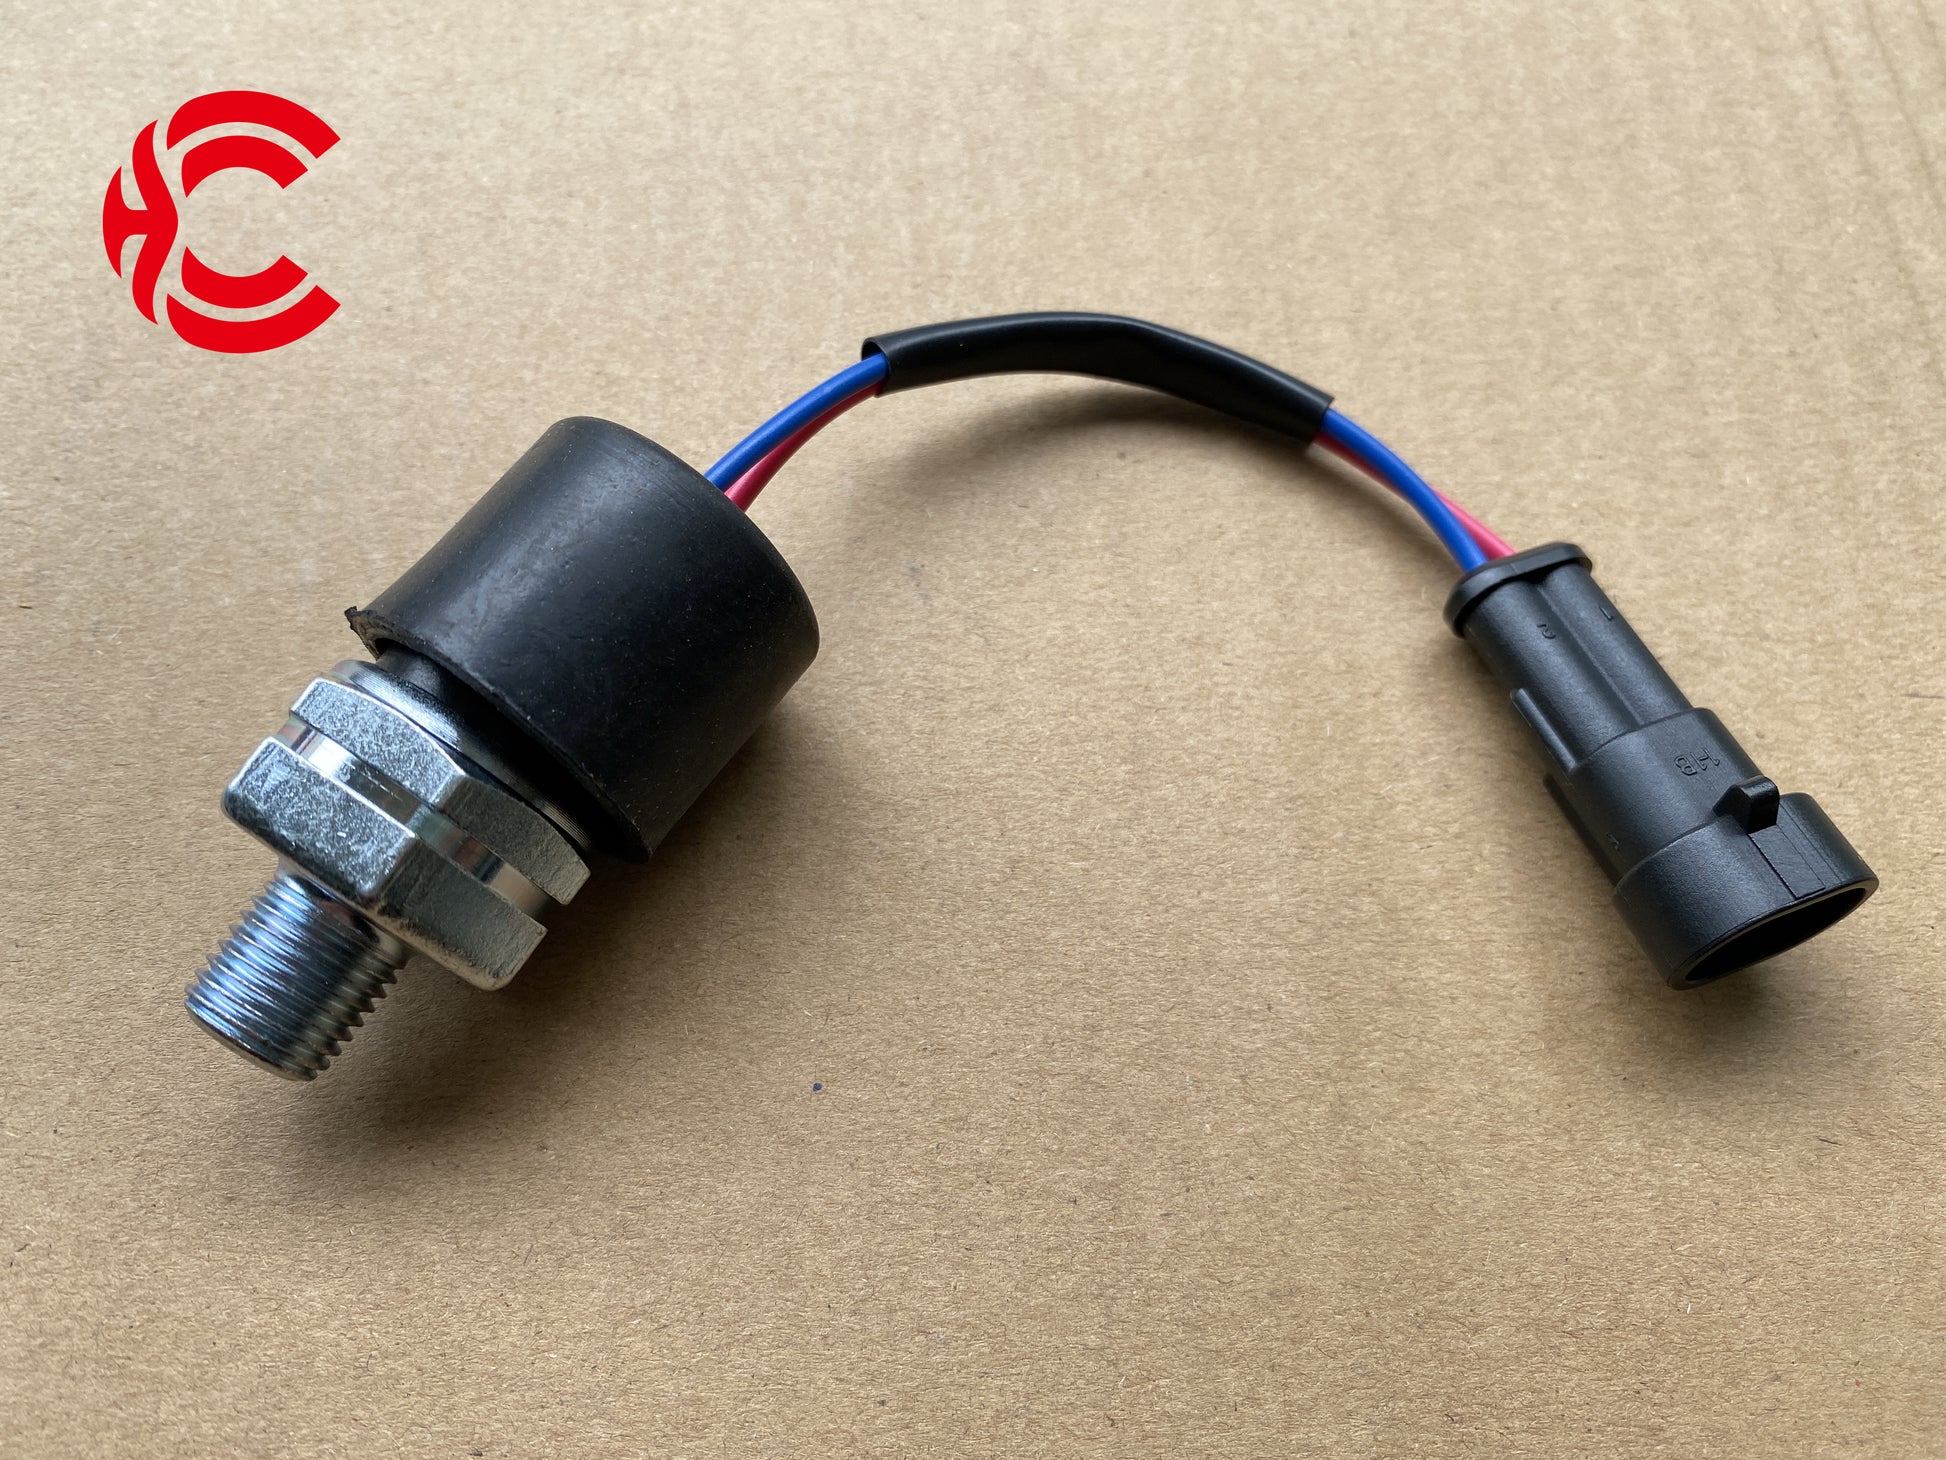 OEM: JK611Q 3712-00098 NPT1/4Material: ABS metalColor: black silverOrigin: Made in ChinaWeight: 50gPacking List: 1* Brake Light Switch More ServiceWe can provide OEM Manufacturing serviceWe can Be your one-step solution for Auto PartsWe can provide technical scheme for you Feel Free to Contact Us, We will get back to you as soon as possible.